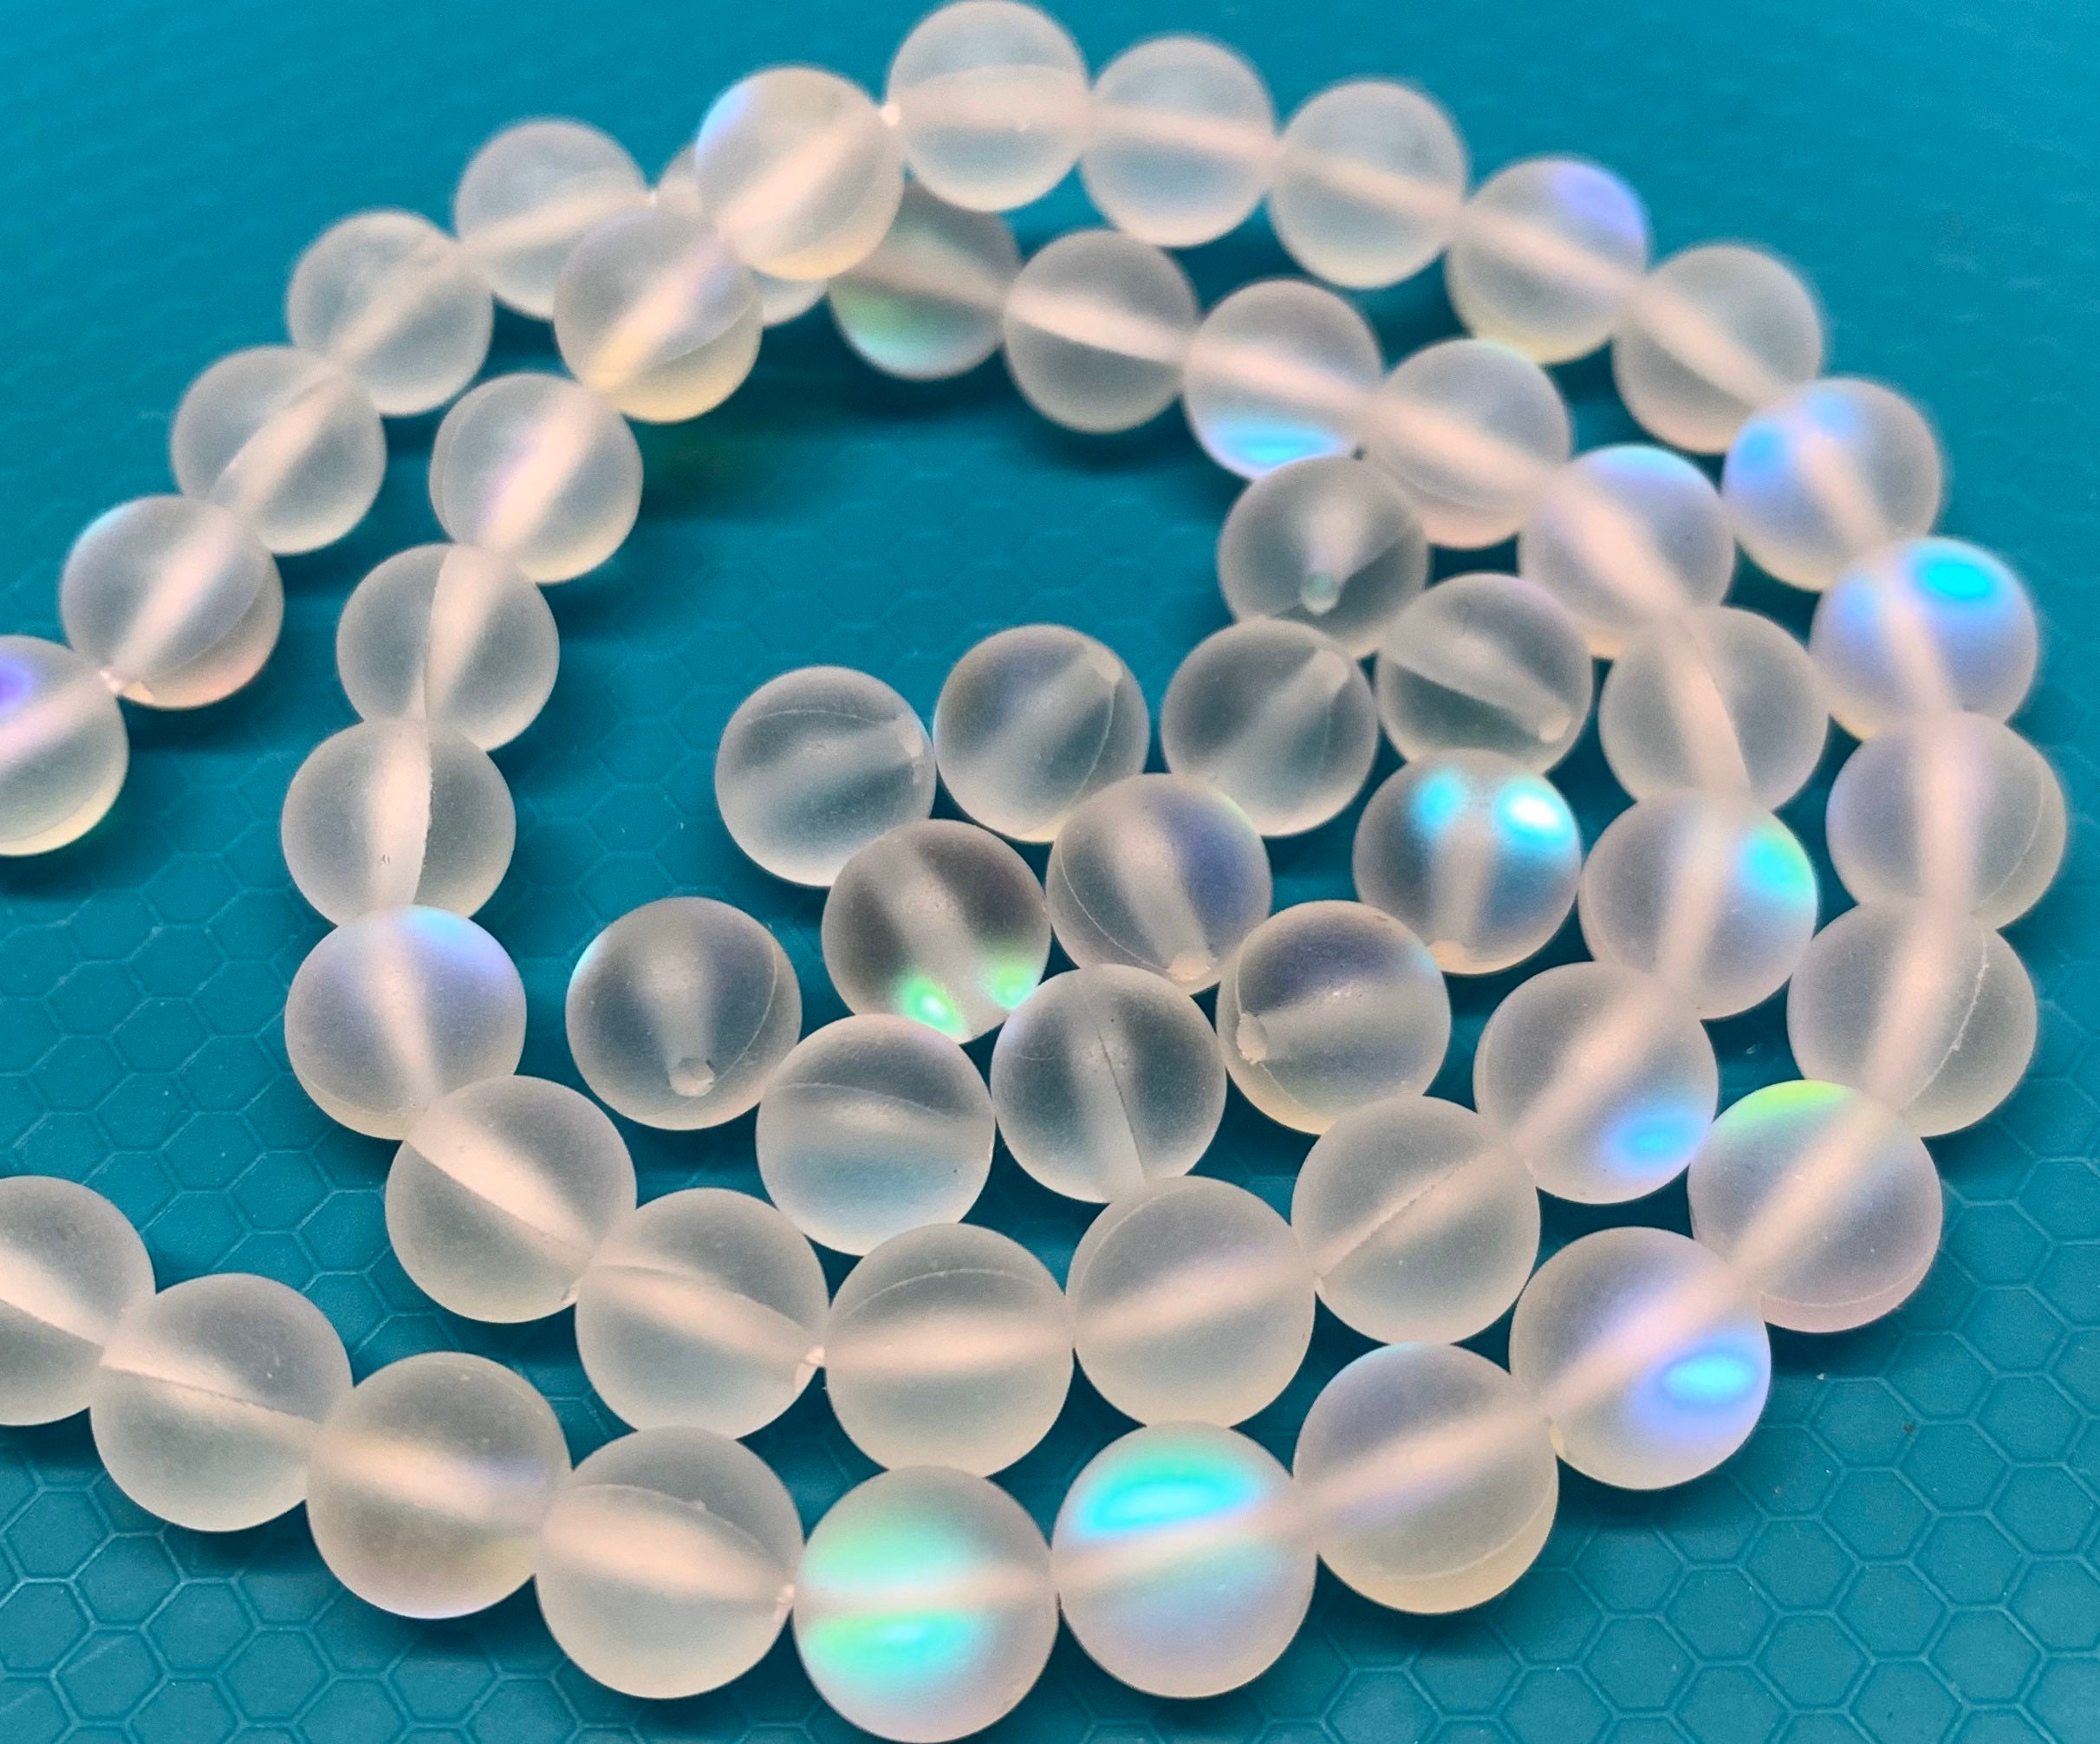 High Quality Synthetic Moonstone Mermaid Beads 8mm Clear Frosted 46 Pcs,  Jewelry Making DIY Crafts Beading Projects 